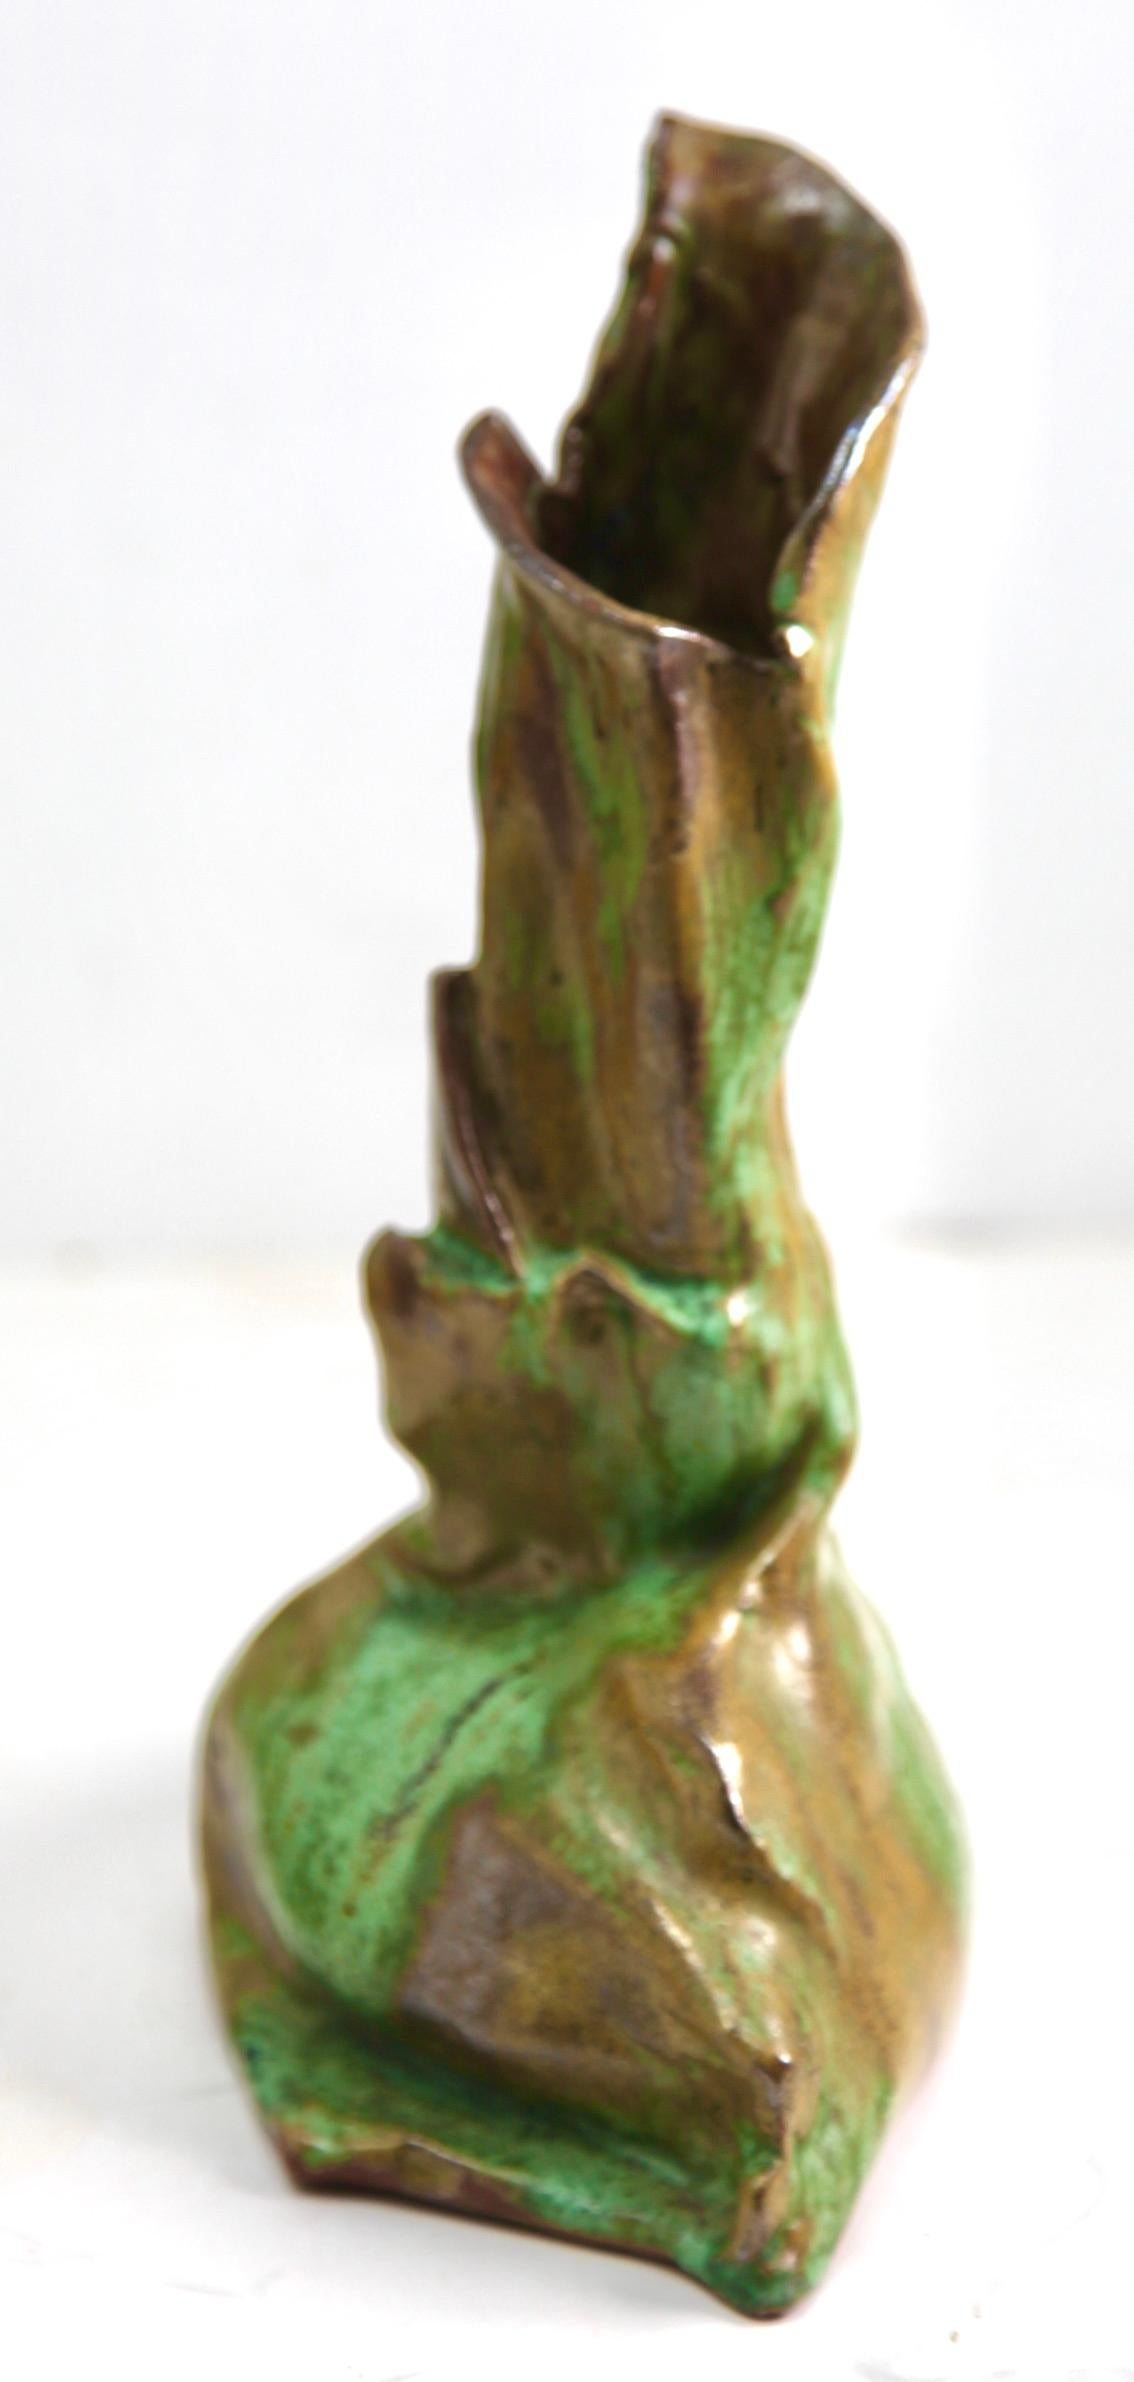 French Oraganis Ceramic Vase Beautiful Glaze in Shades of Brown and Green, circa 1930 For Sale